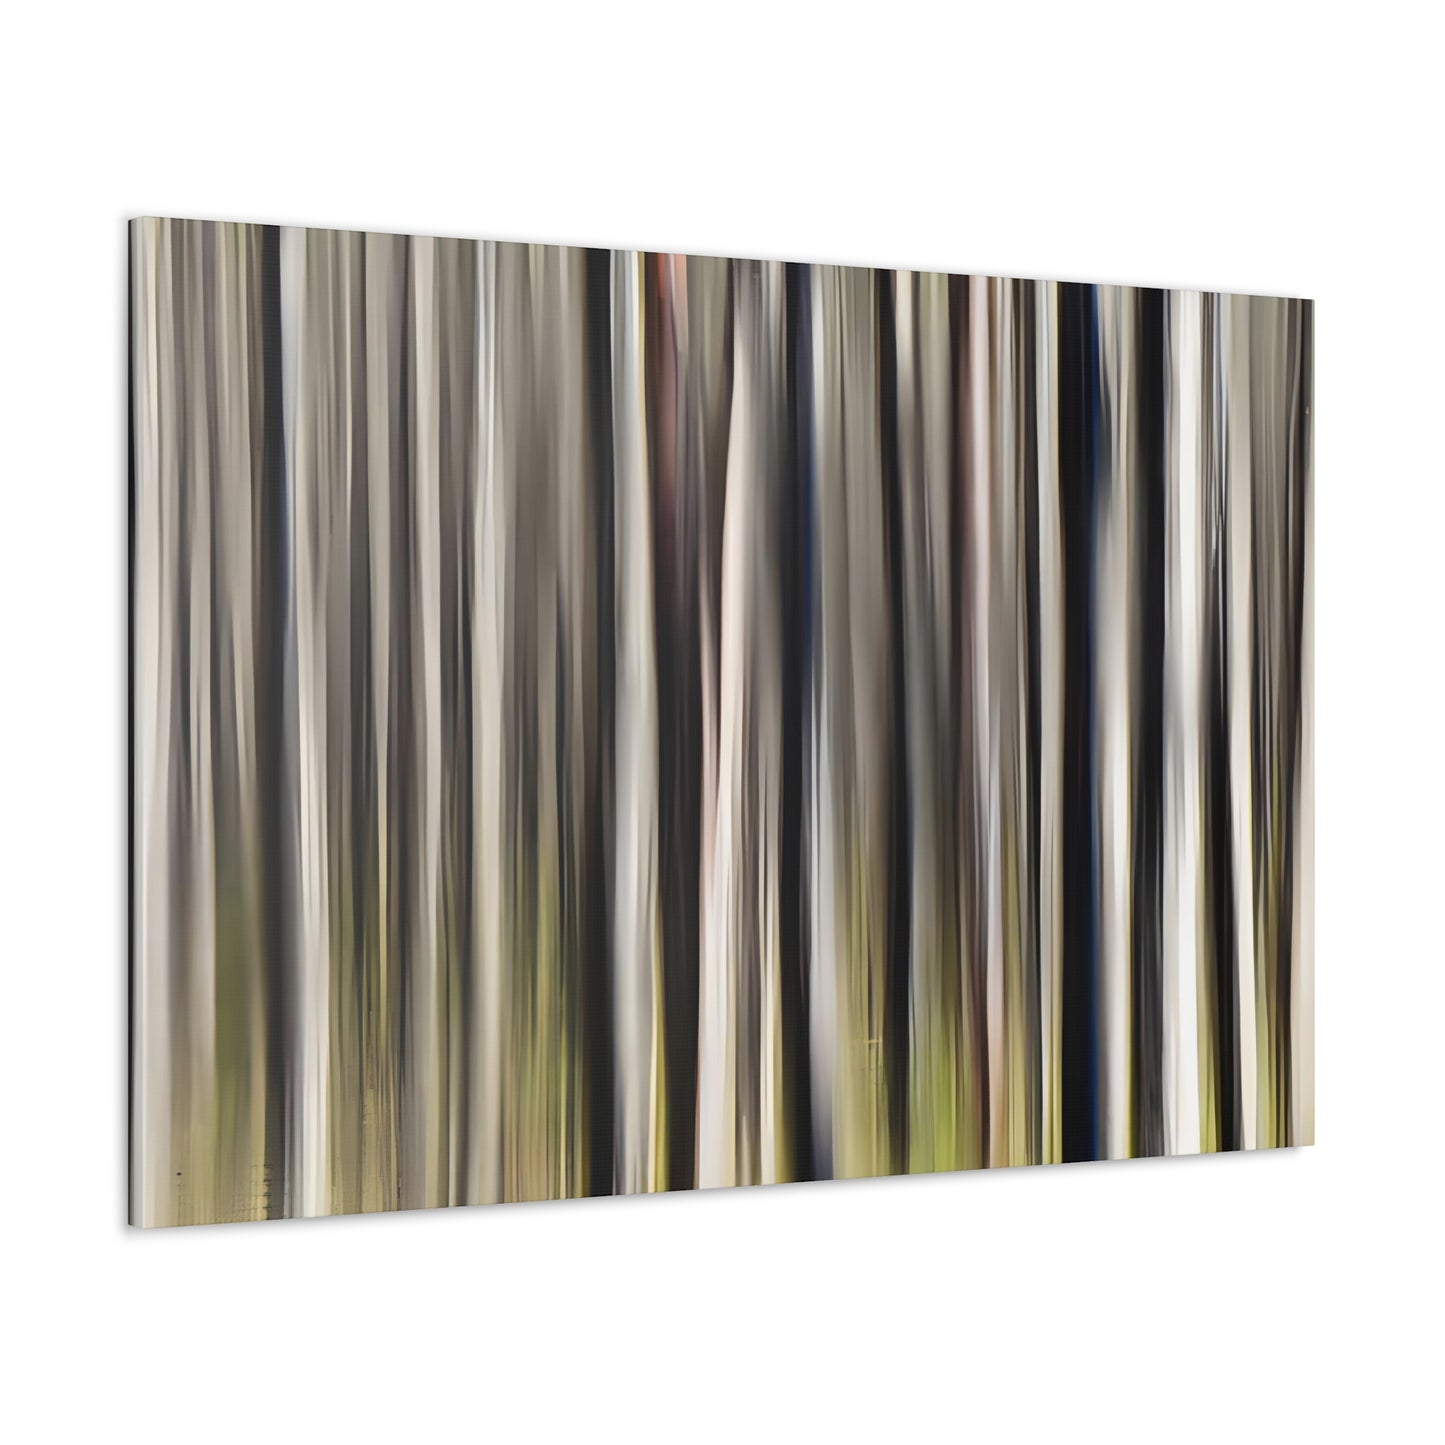 Theo's Whispering Woods - Canvas